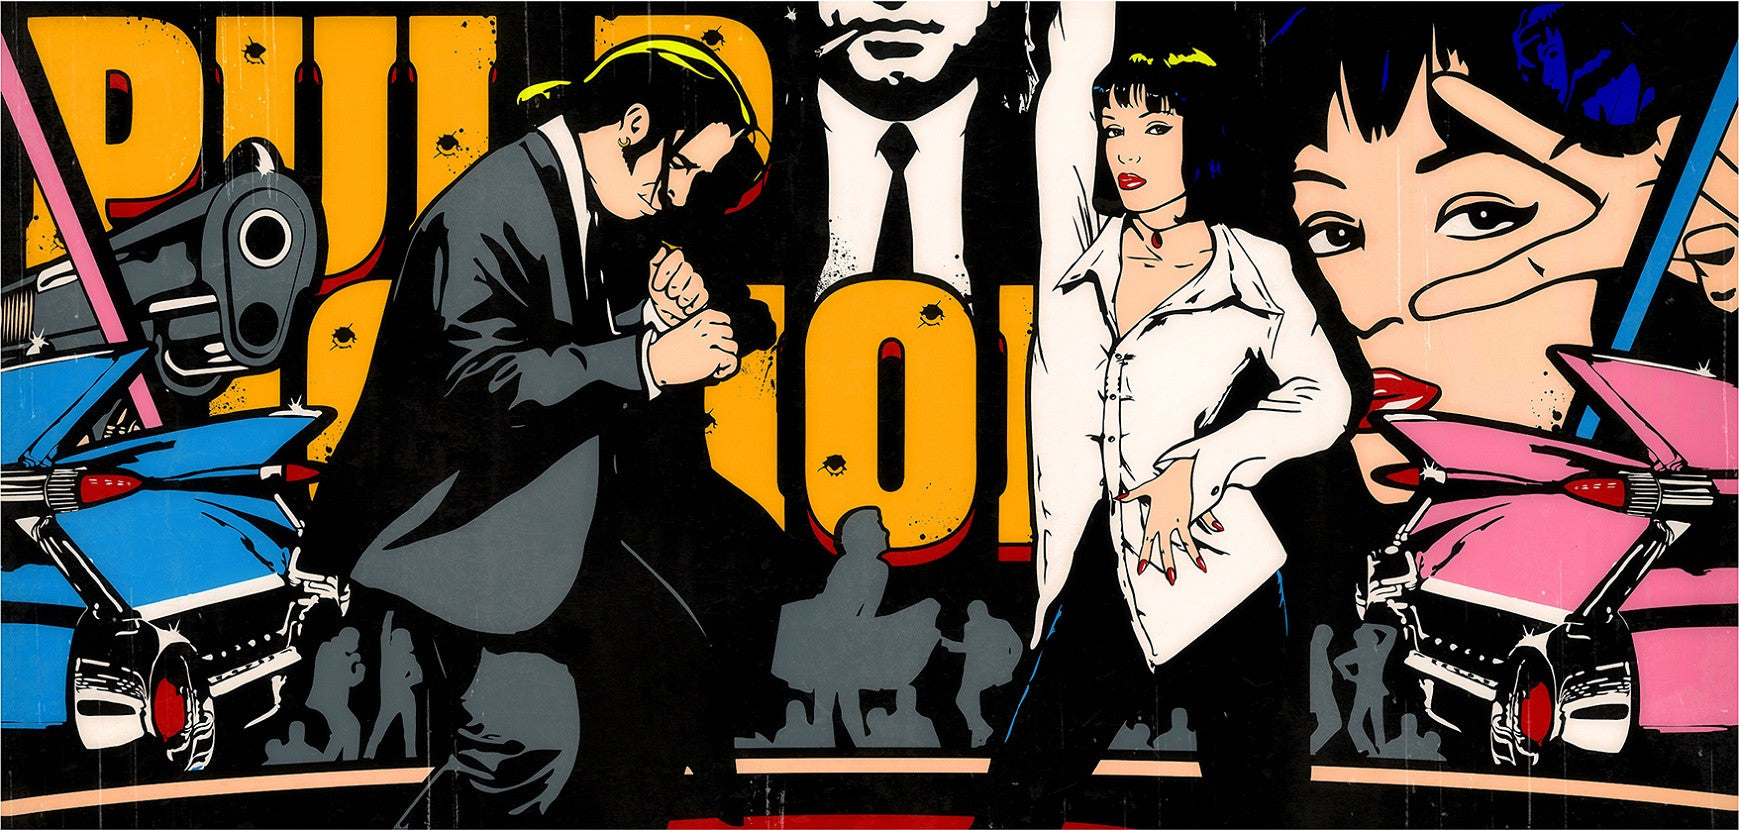 "Jack Rabbit Sims" (Pulp Fiction) by JJ Adams (limited edition print) - New Look Art